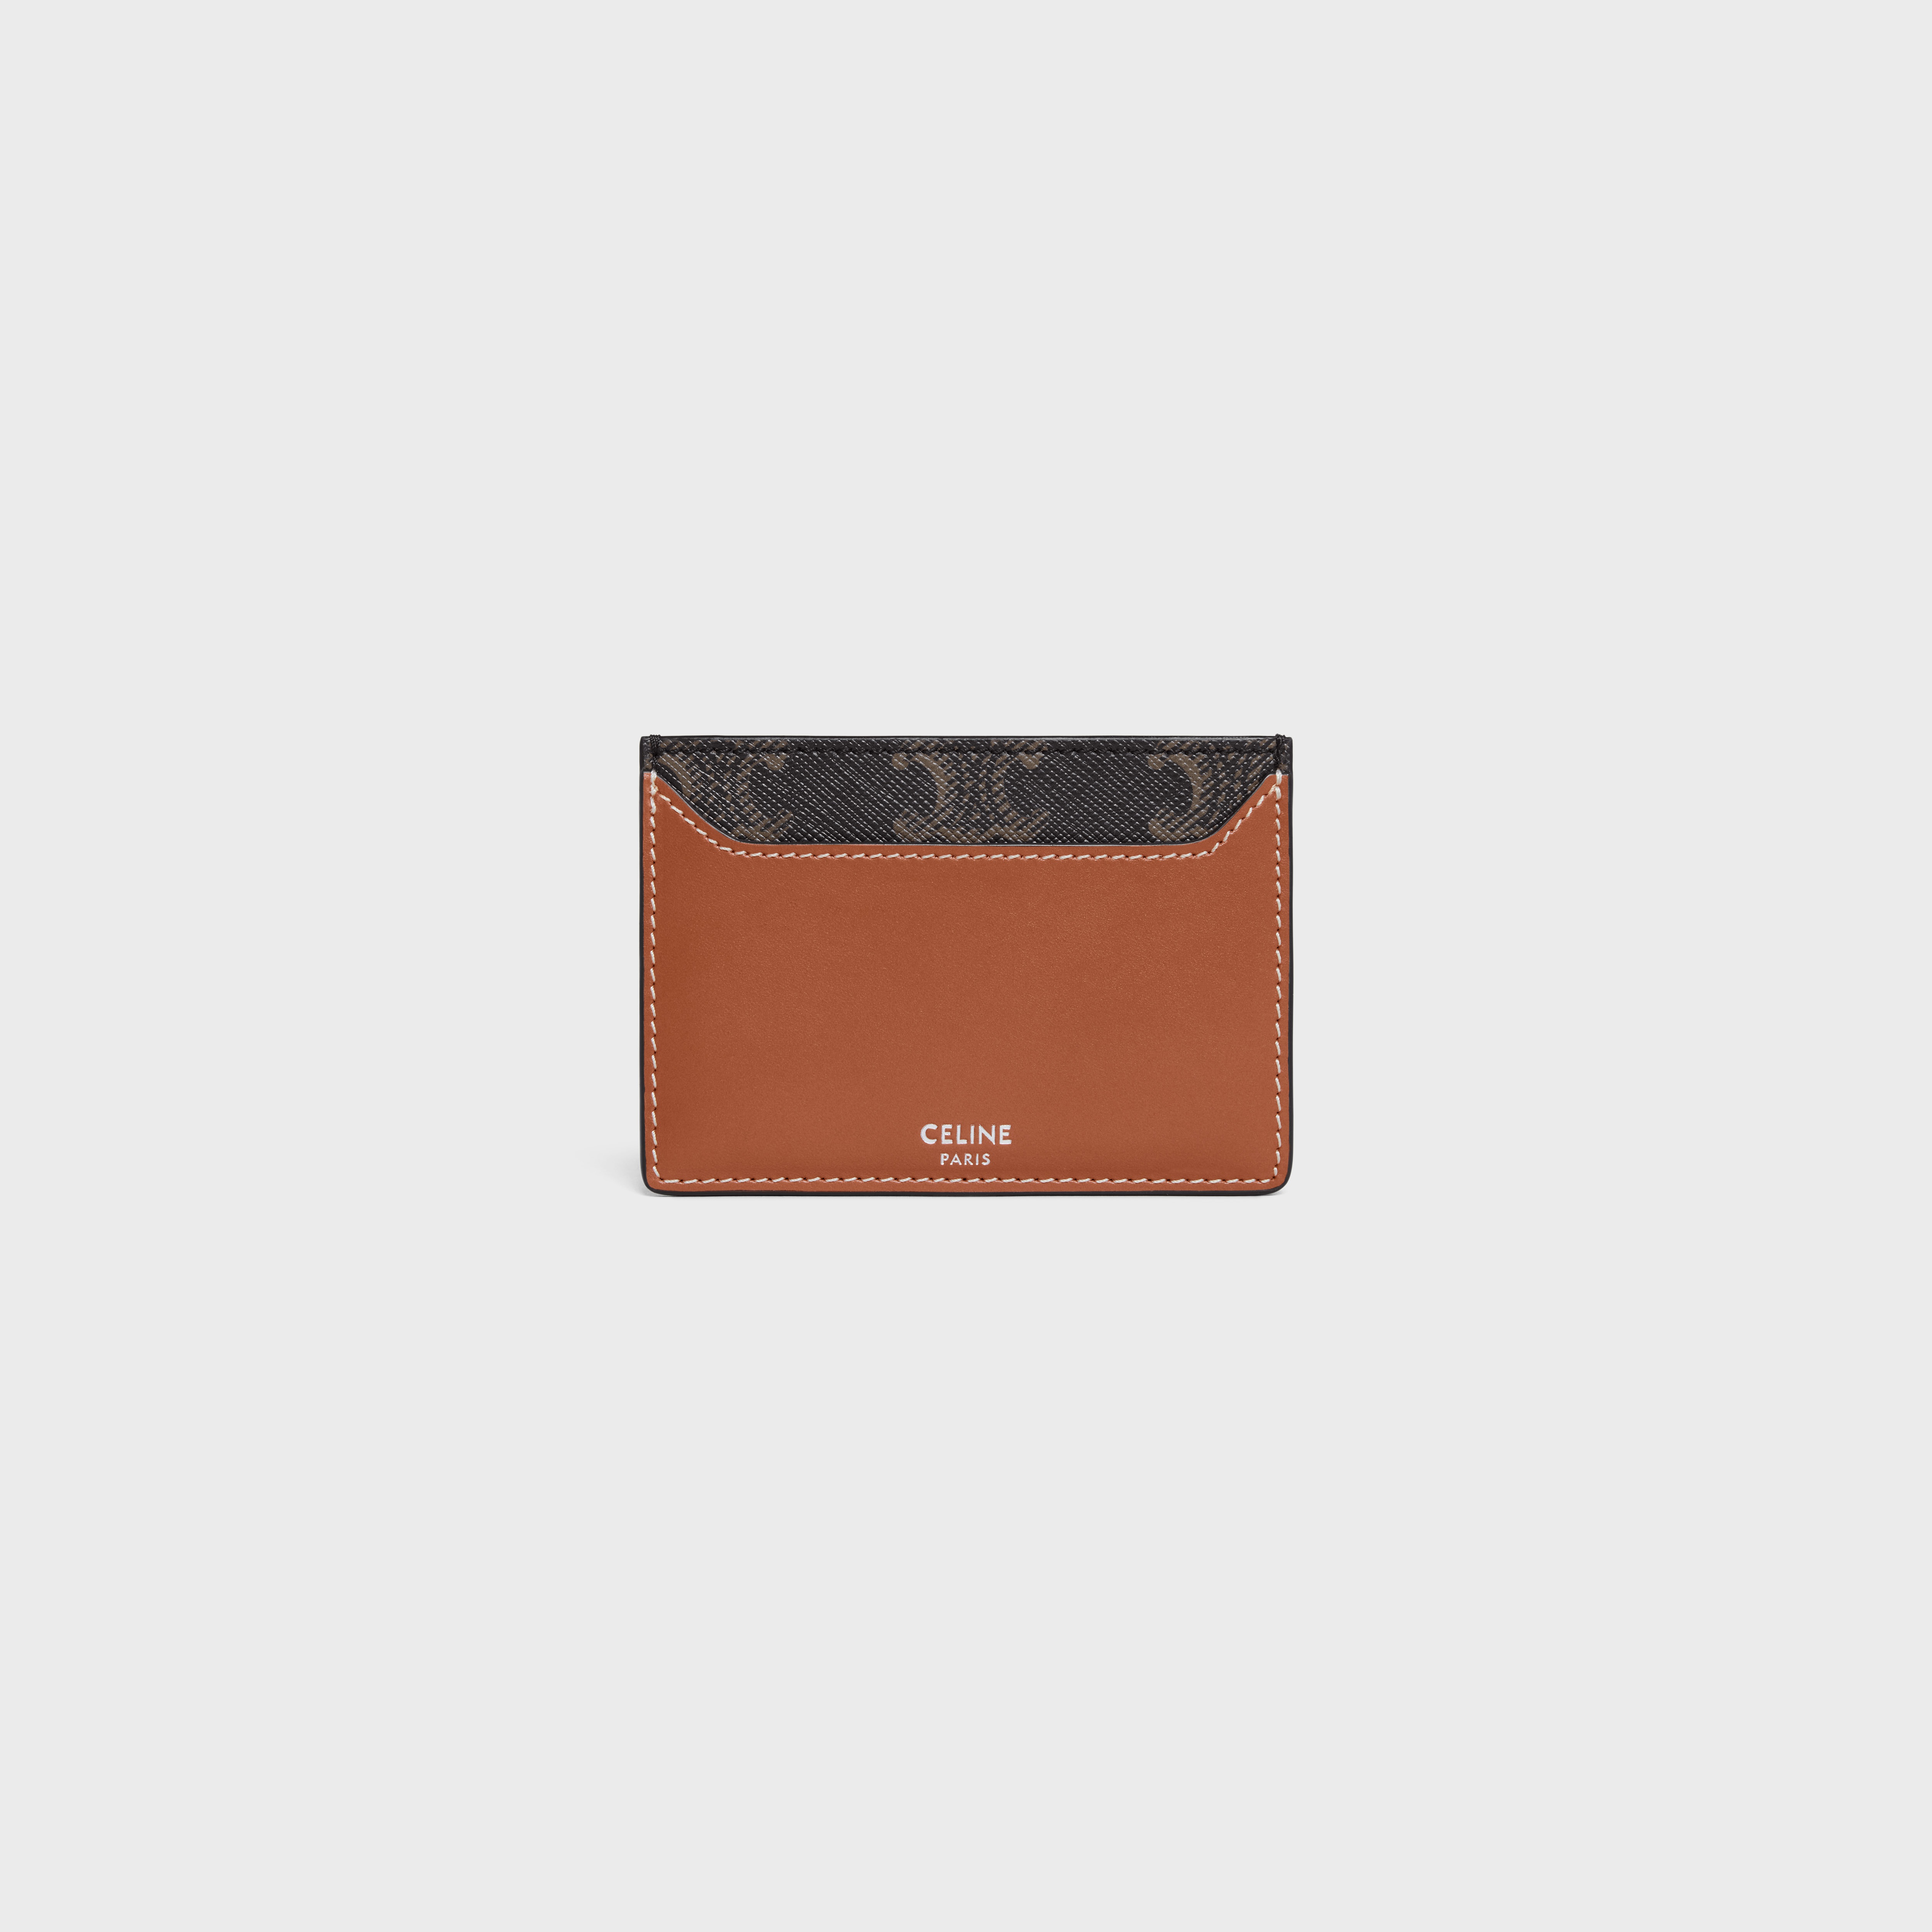 BUSINESS CARD HOLDER IN TRIOMPHE CANVAS AND LAMBSKIN - TAN